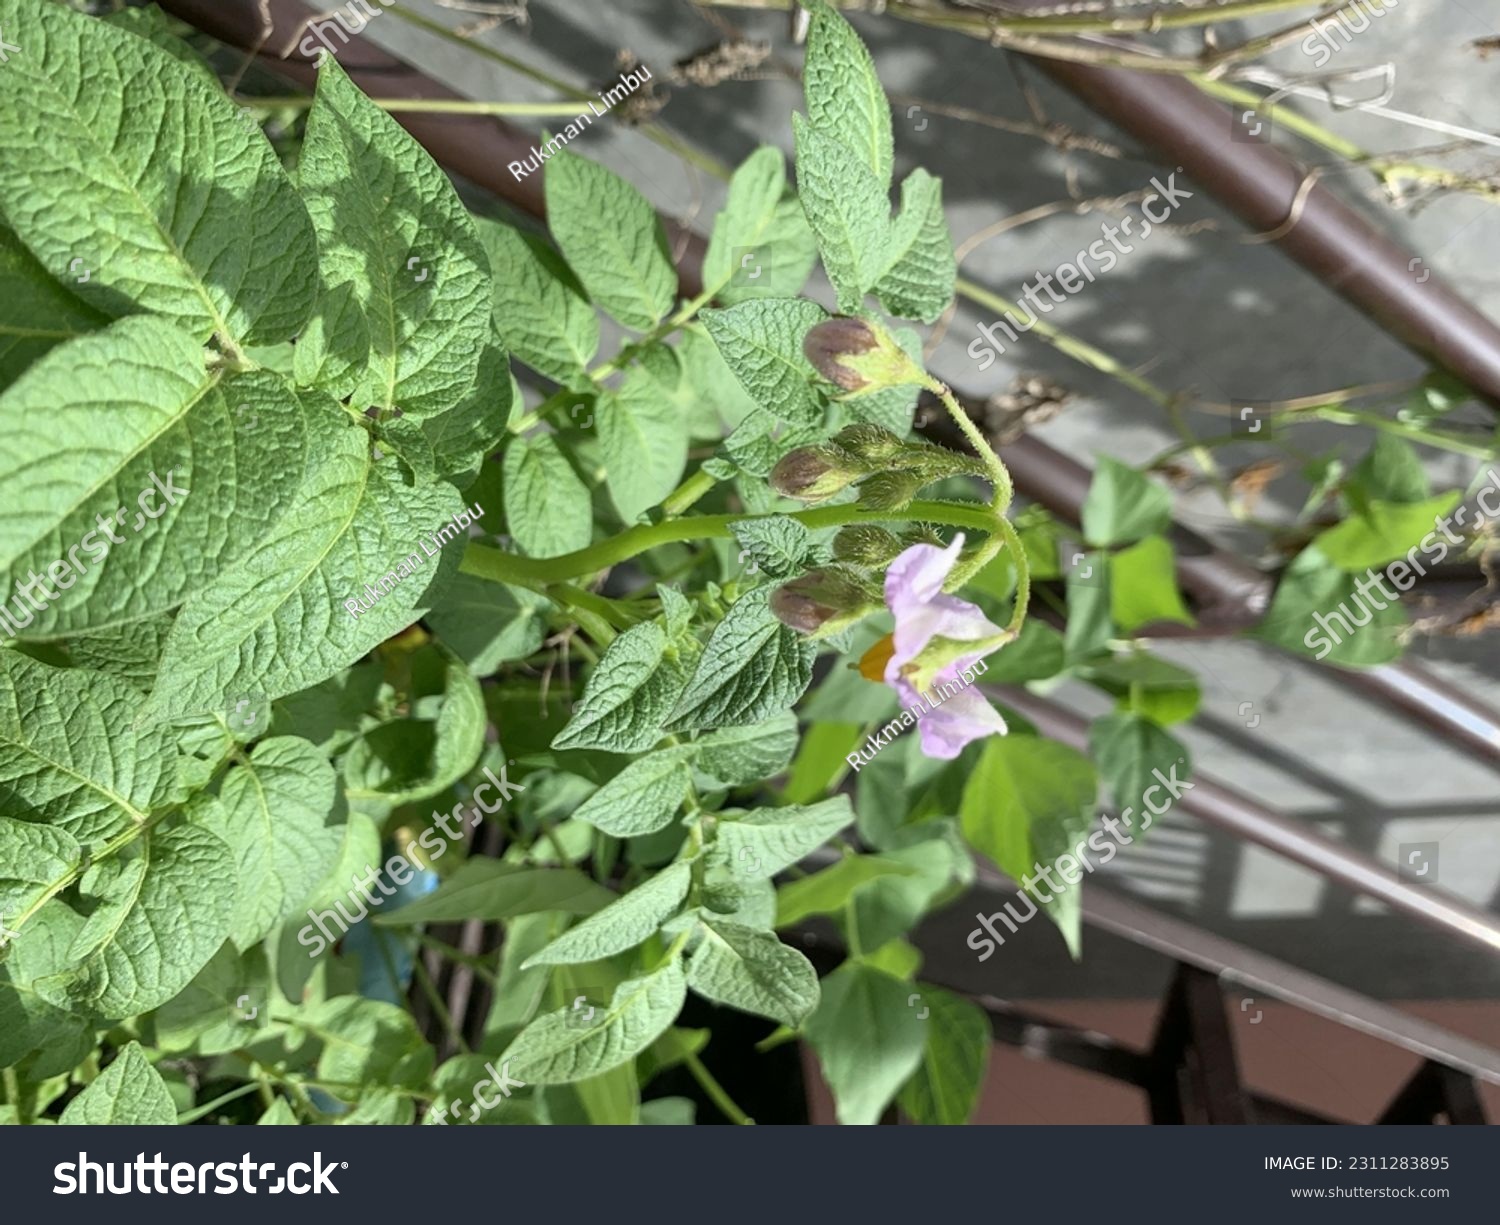 Flowering  Potato - Potato flowers and fruit are produced because this is how the plants multiply themselves, by seed. #2311283895